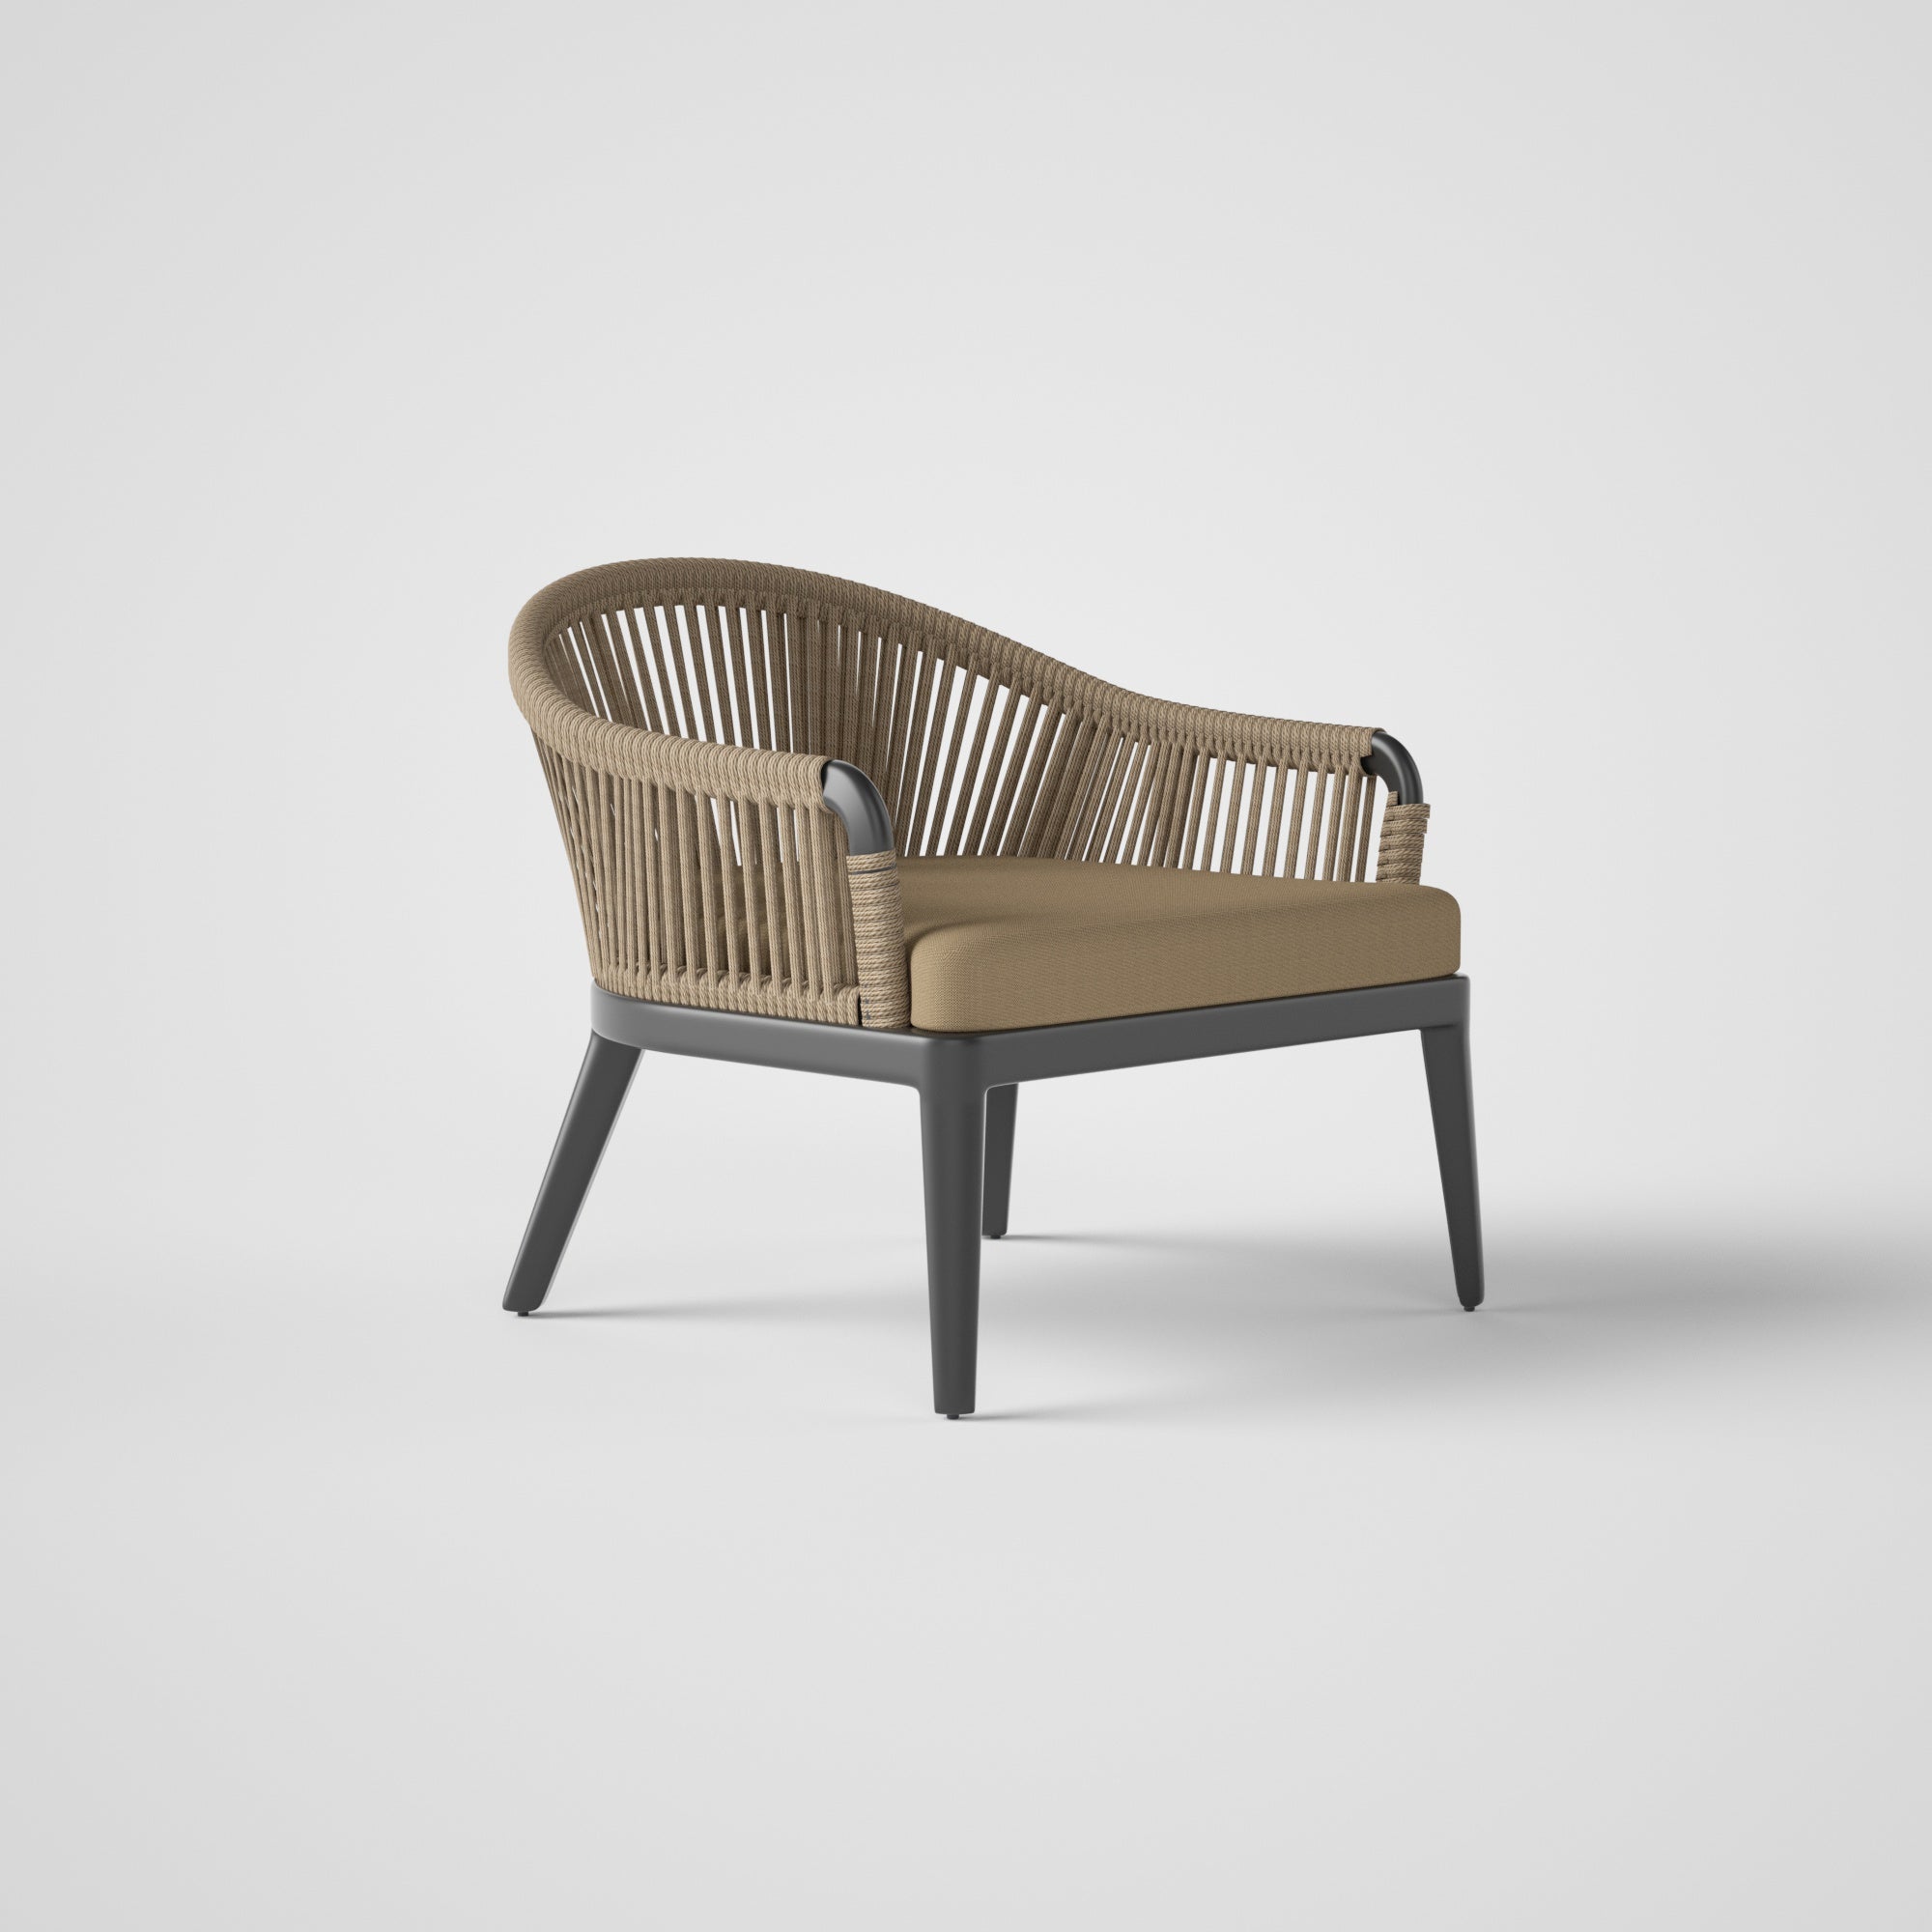 Lounge armchair with straps.